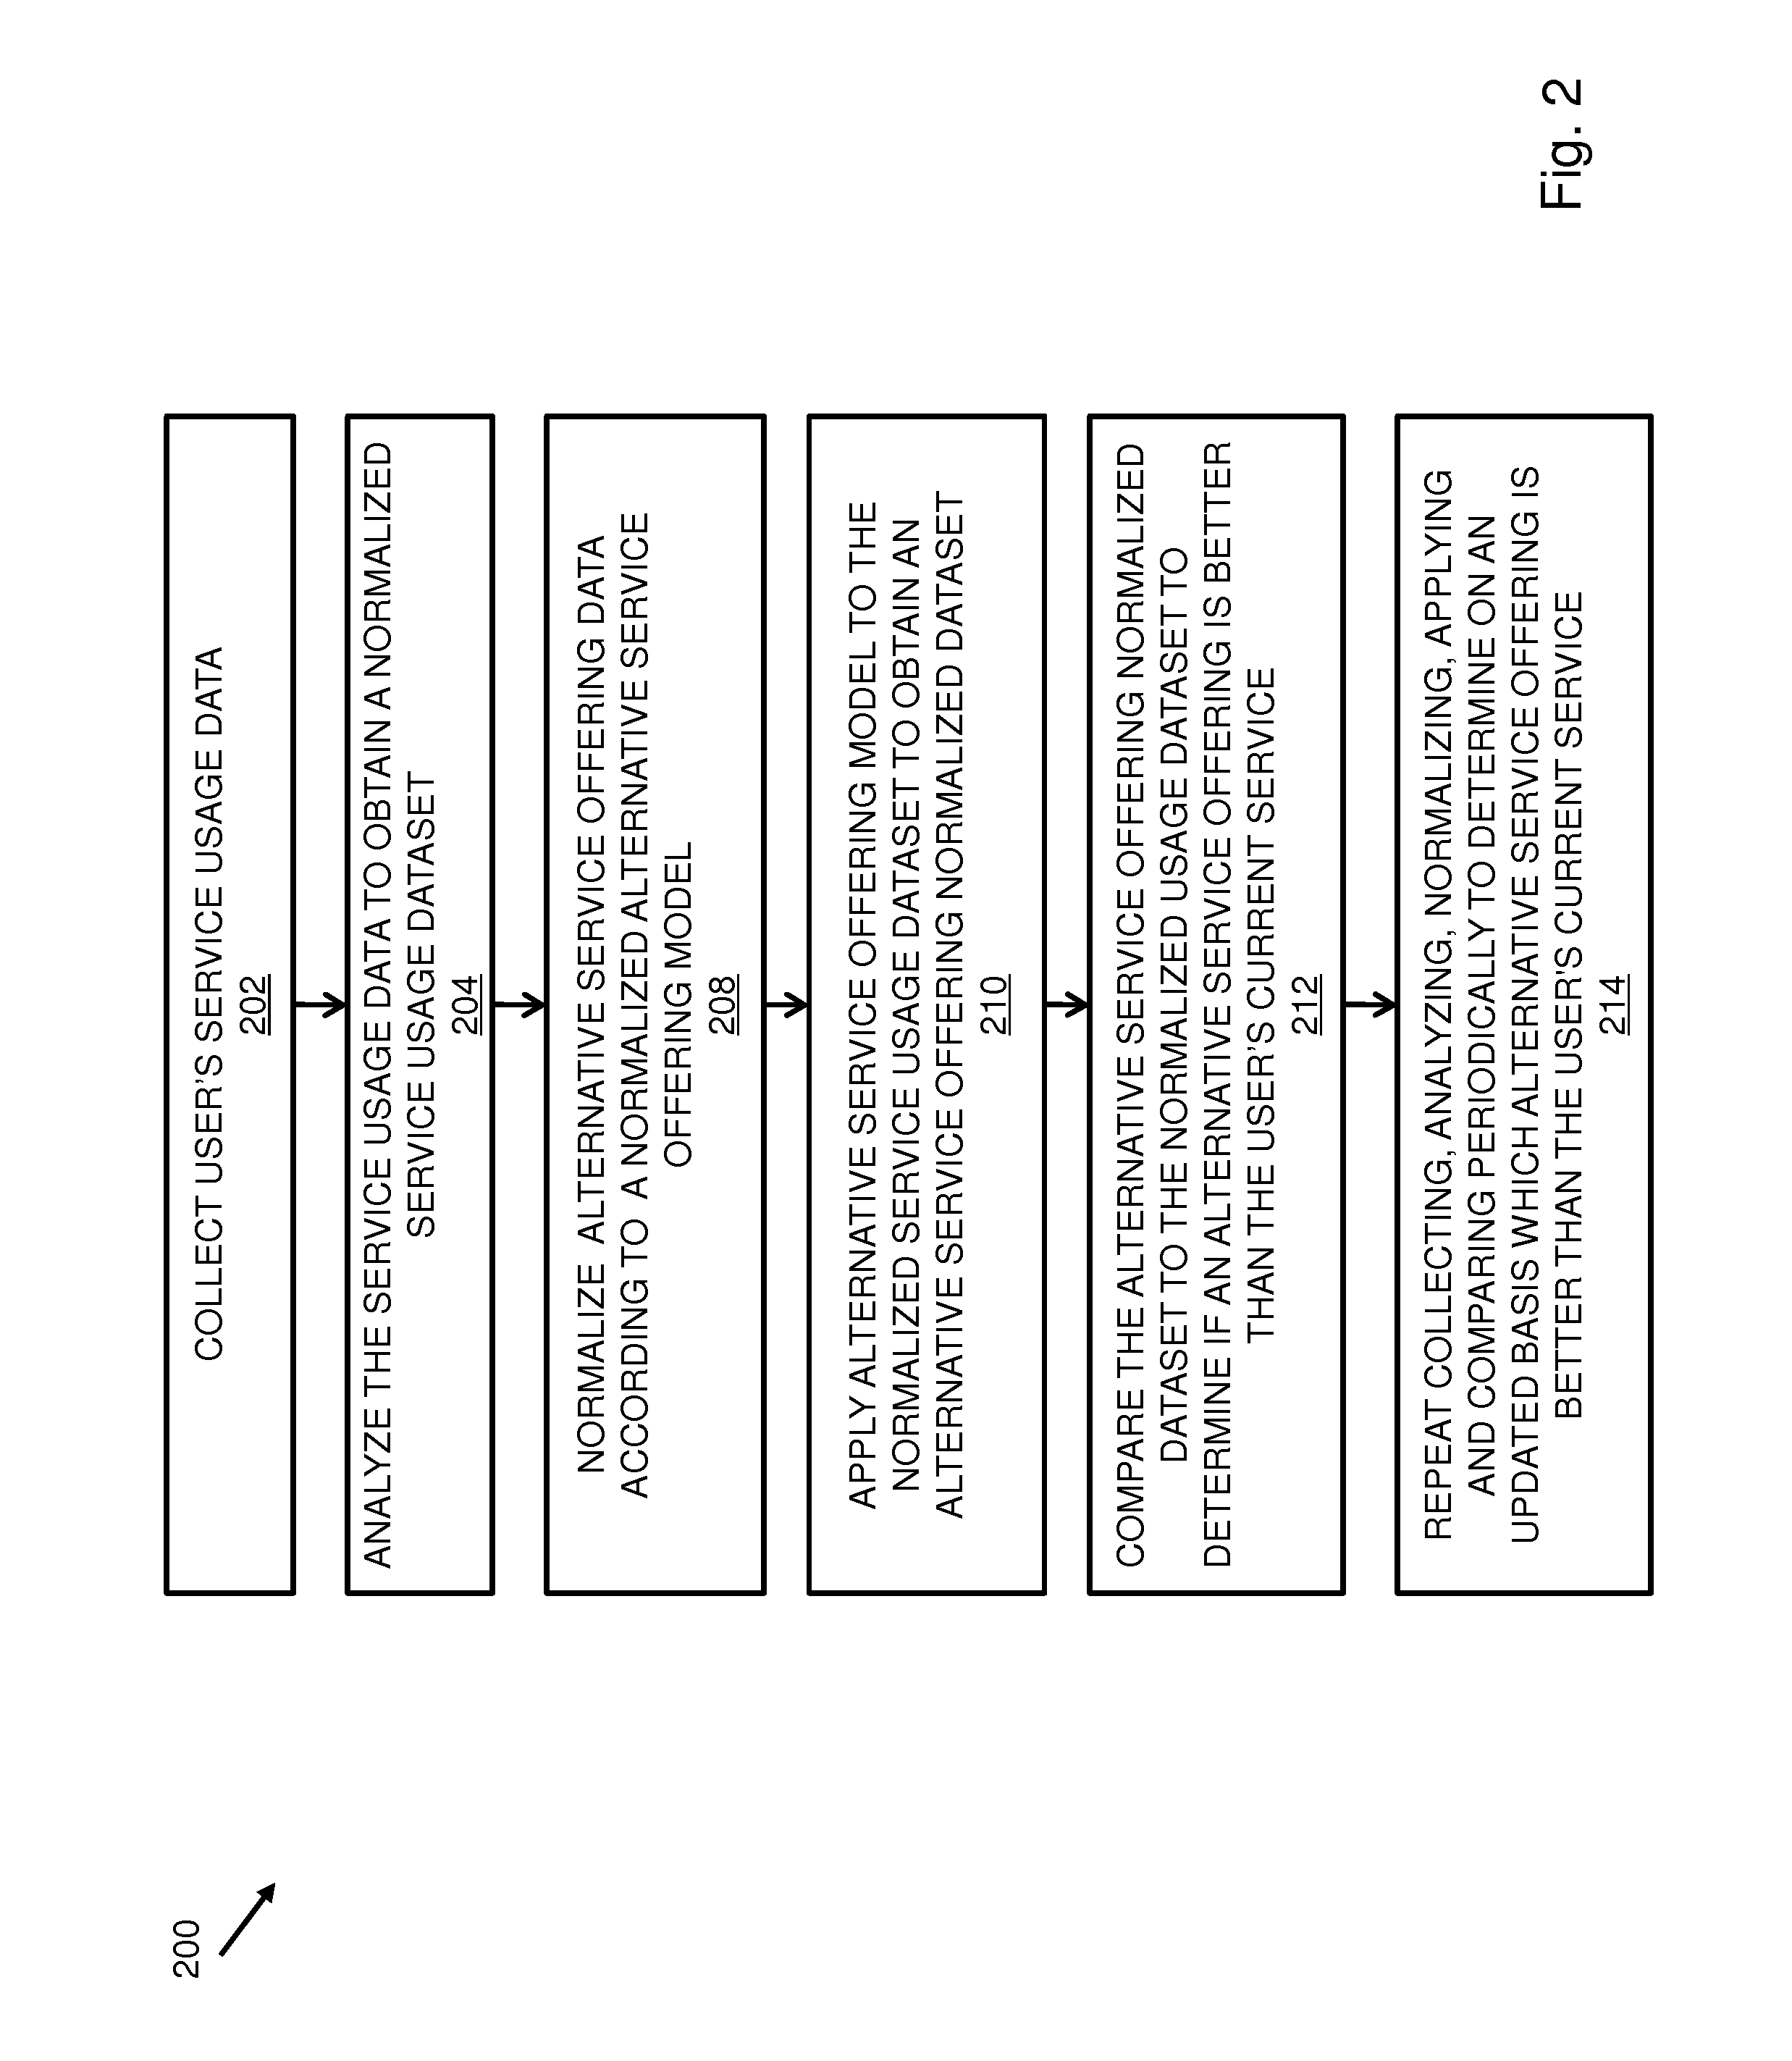 Method and system to dynamically adjust offer spend thresholds and personalize offer criteria specific to individual users